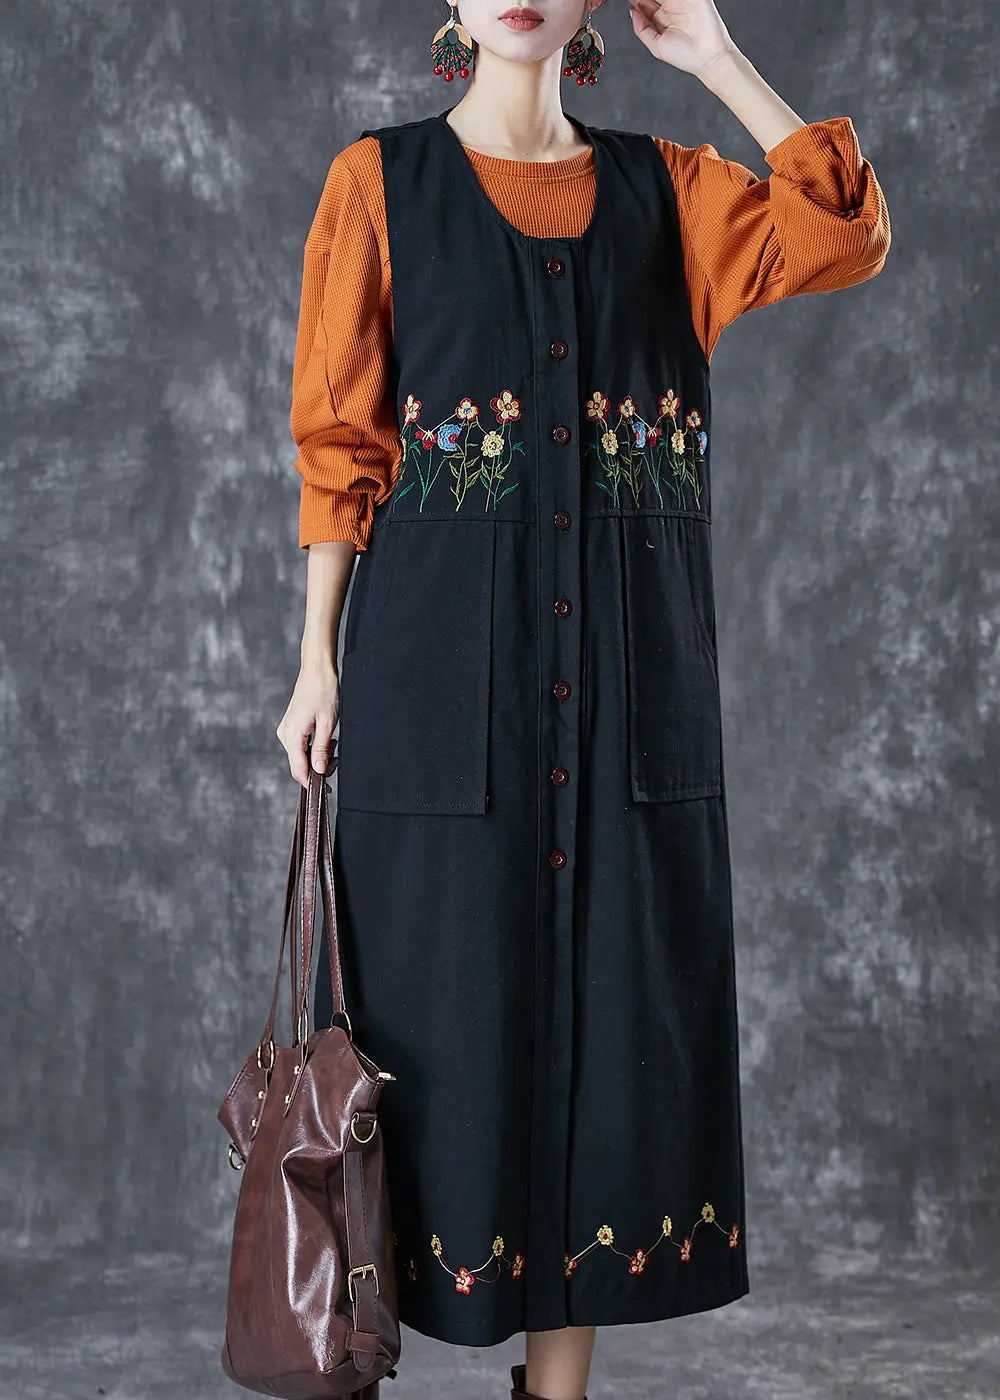 Bohemian Black Embroidered Pockets Cotton Two Pieces Set Spring Ada Fashion